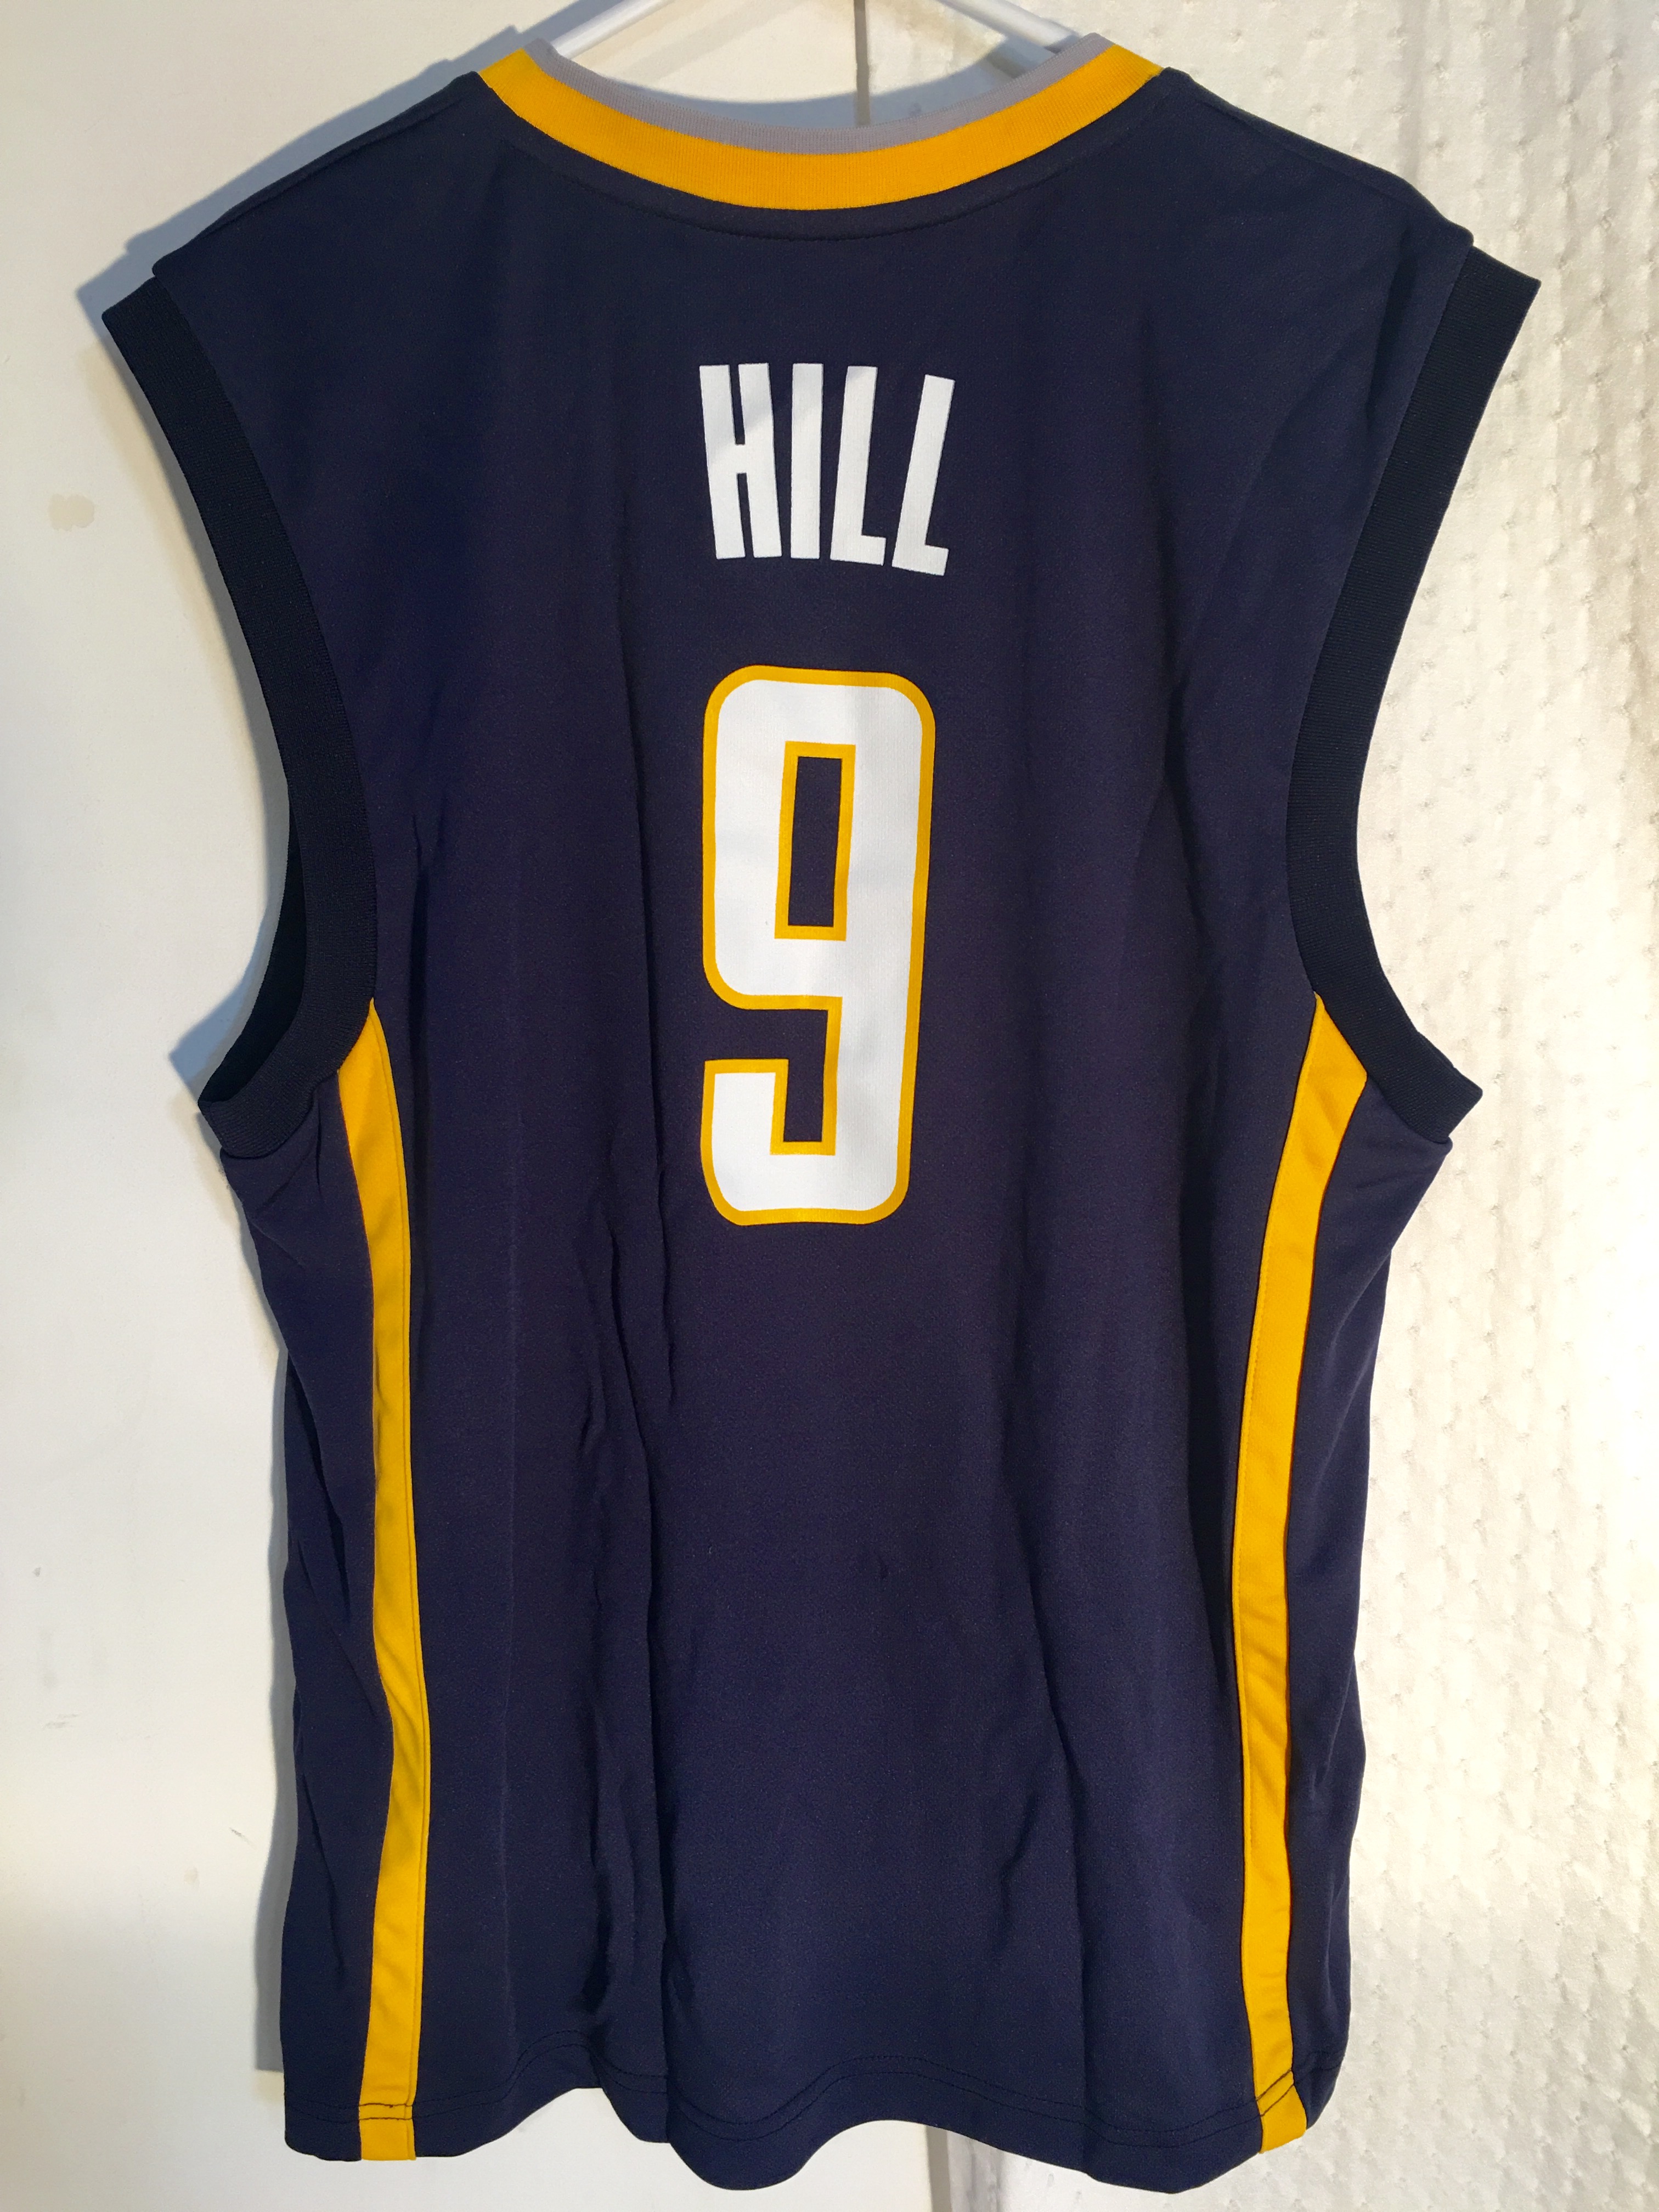 george hill jersey number